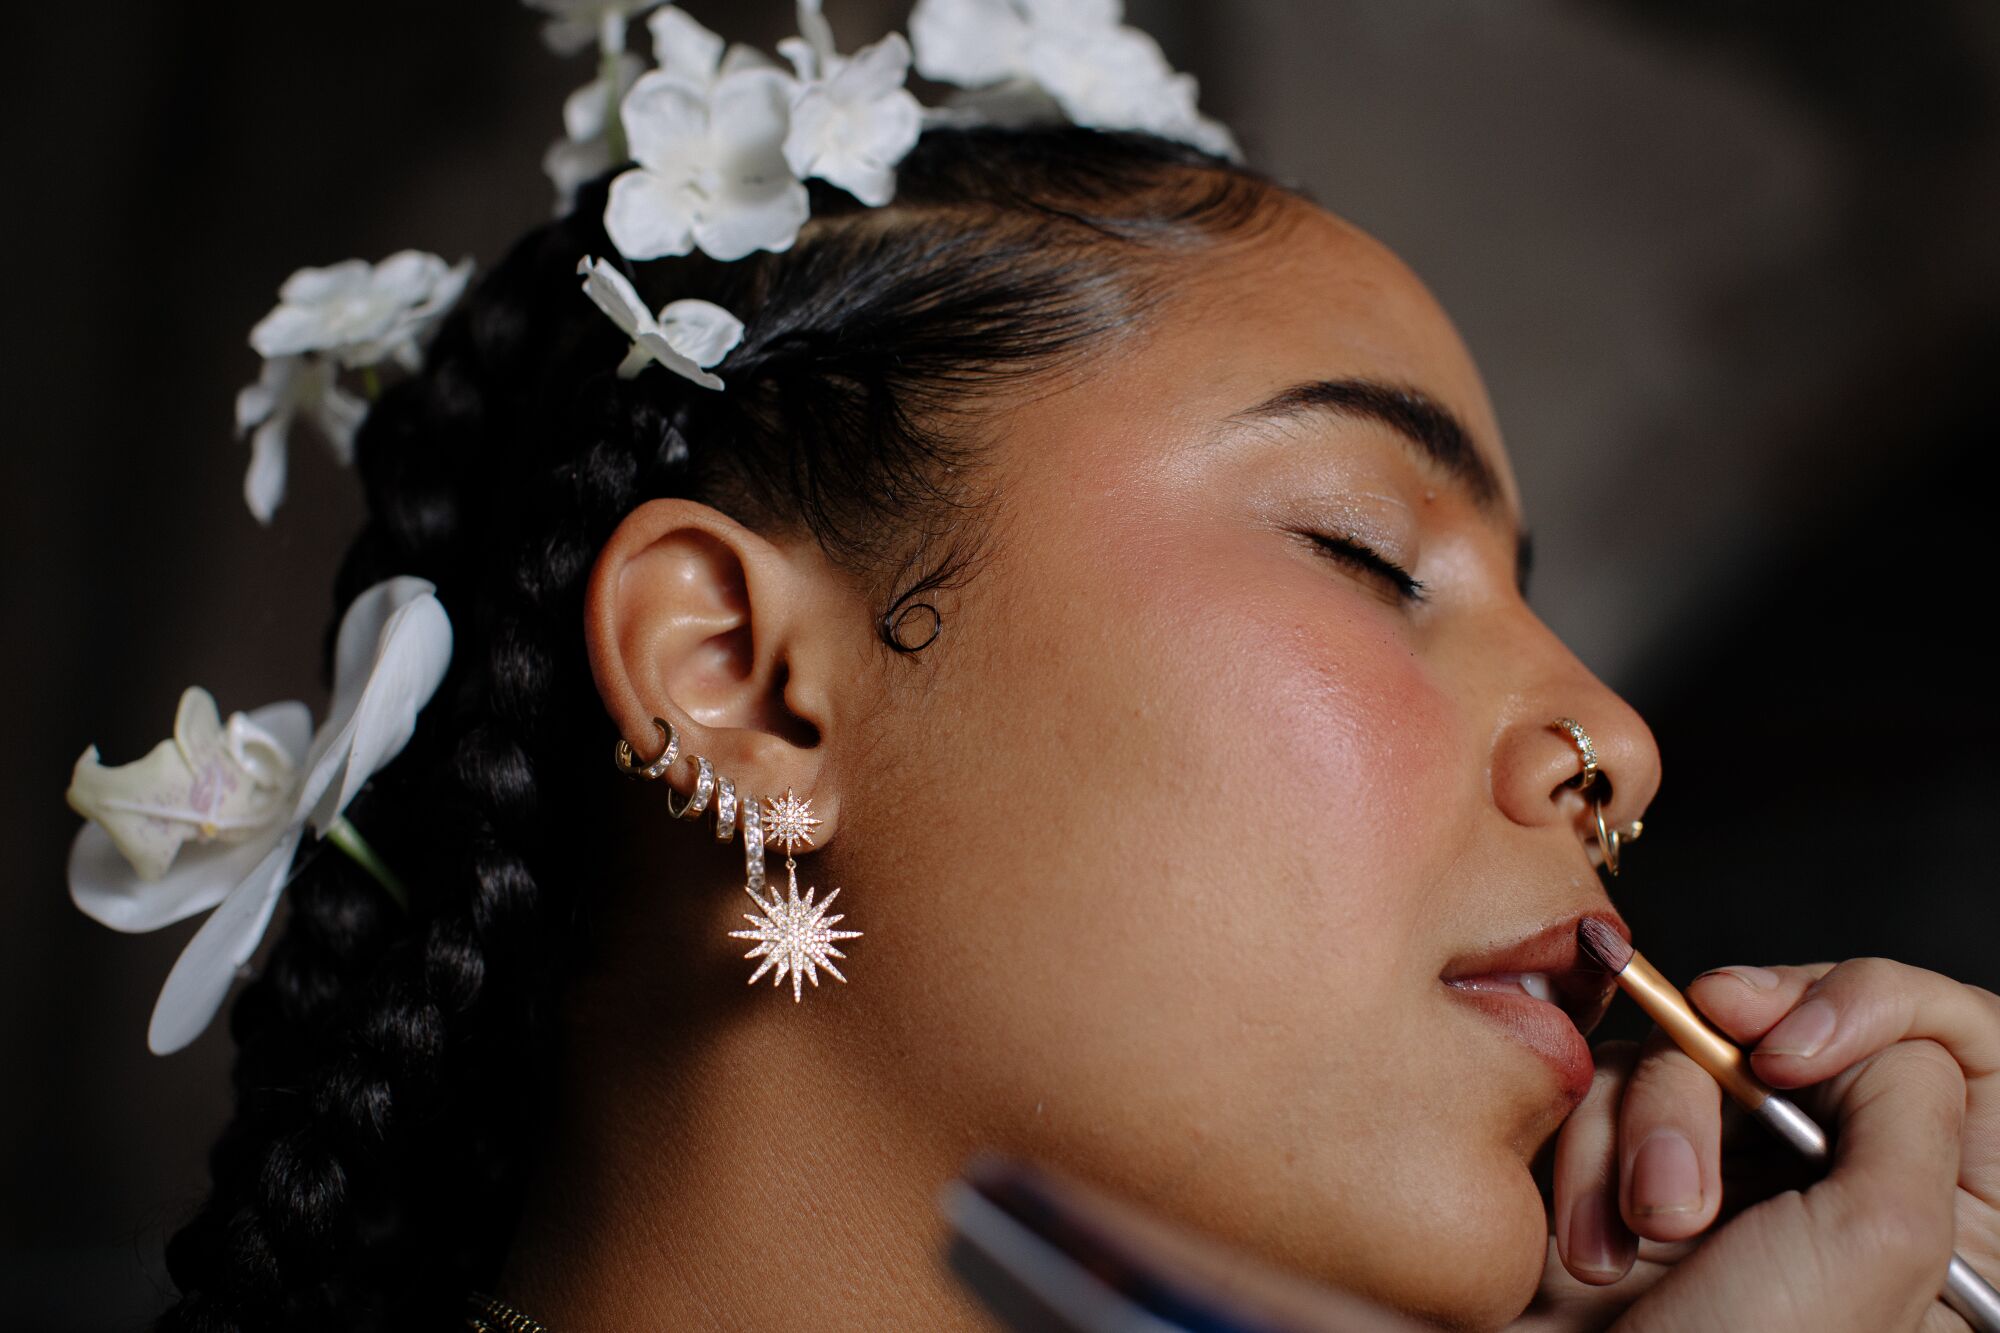 A close-up of a woman with her eyes closed and white flowers in her hair.